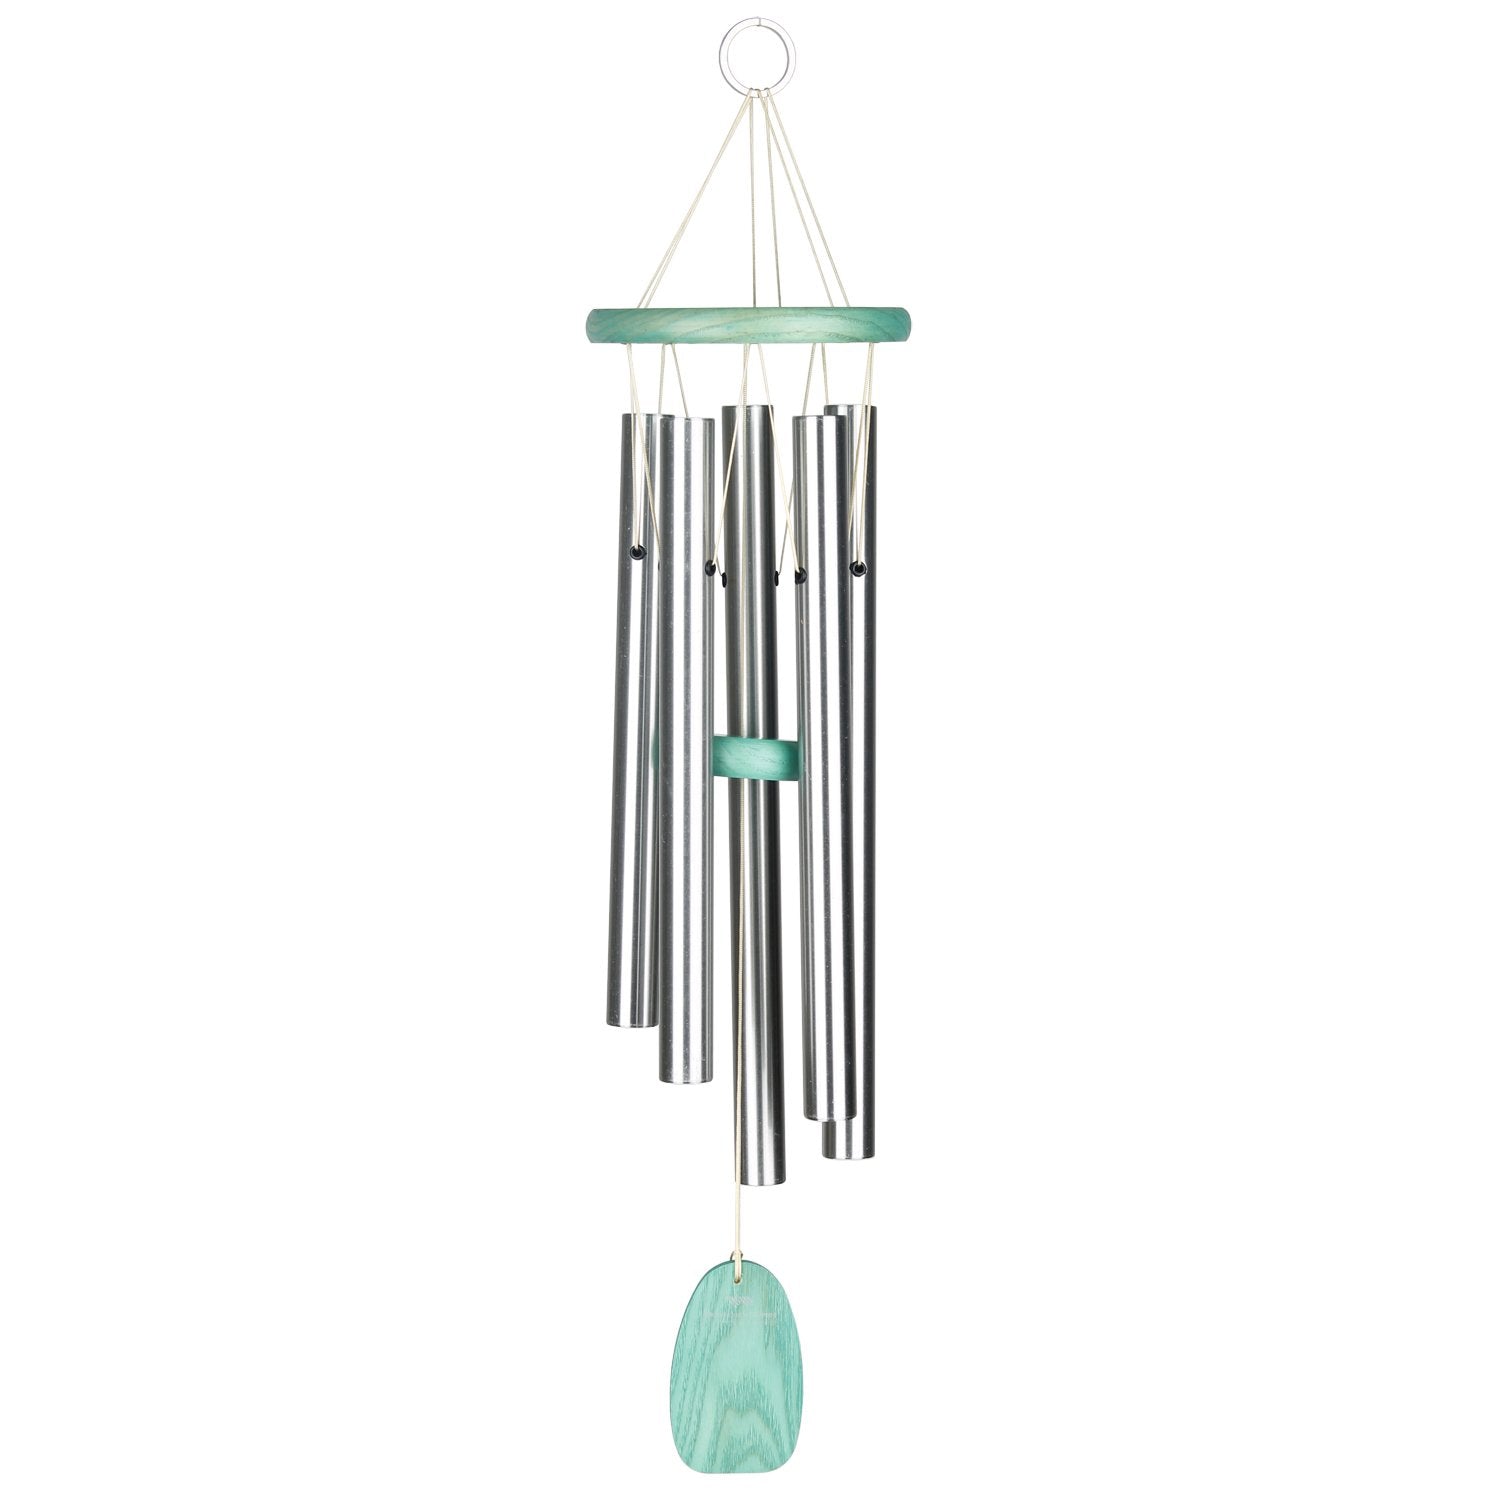 Beachcomber Chime - Gracious Green full product image